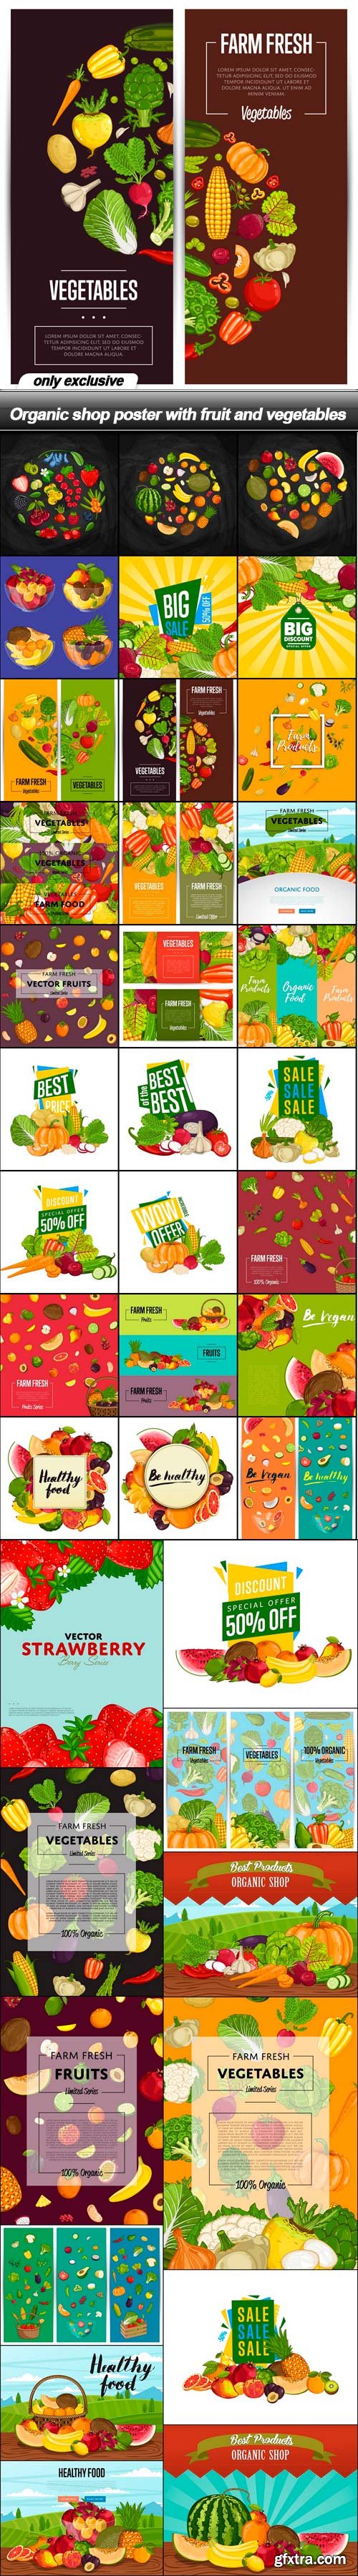 Organic shop poster with fruit and vegetables - 39 EPS